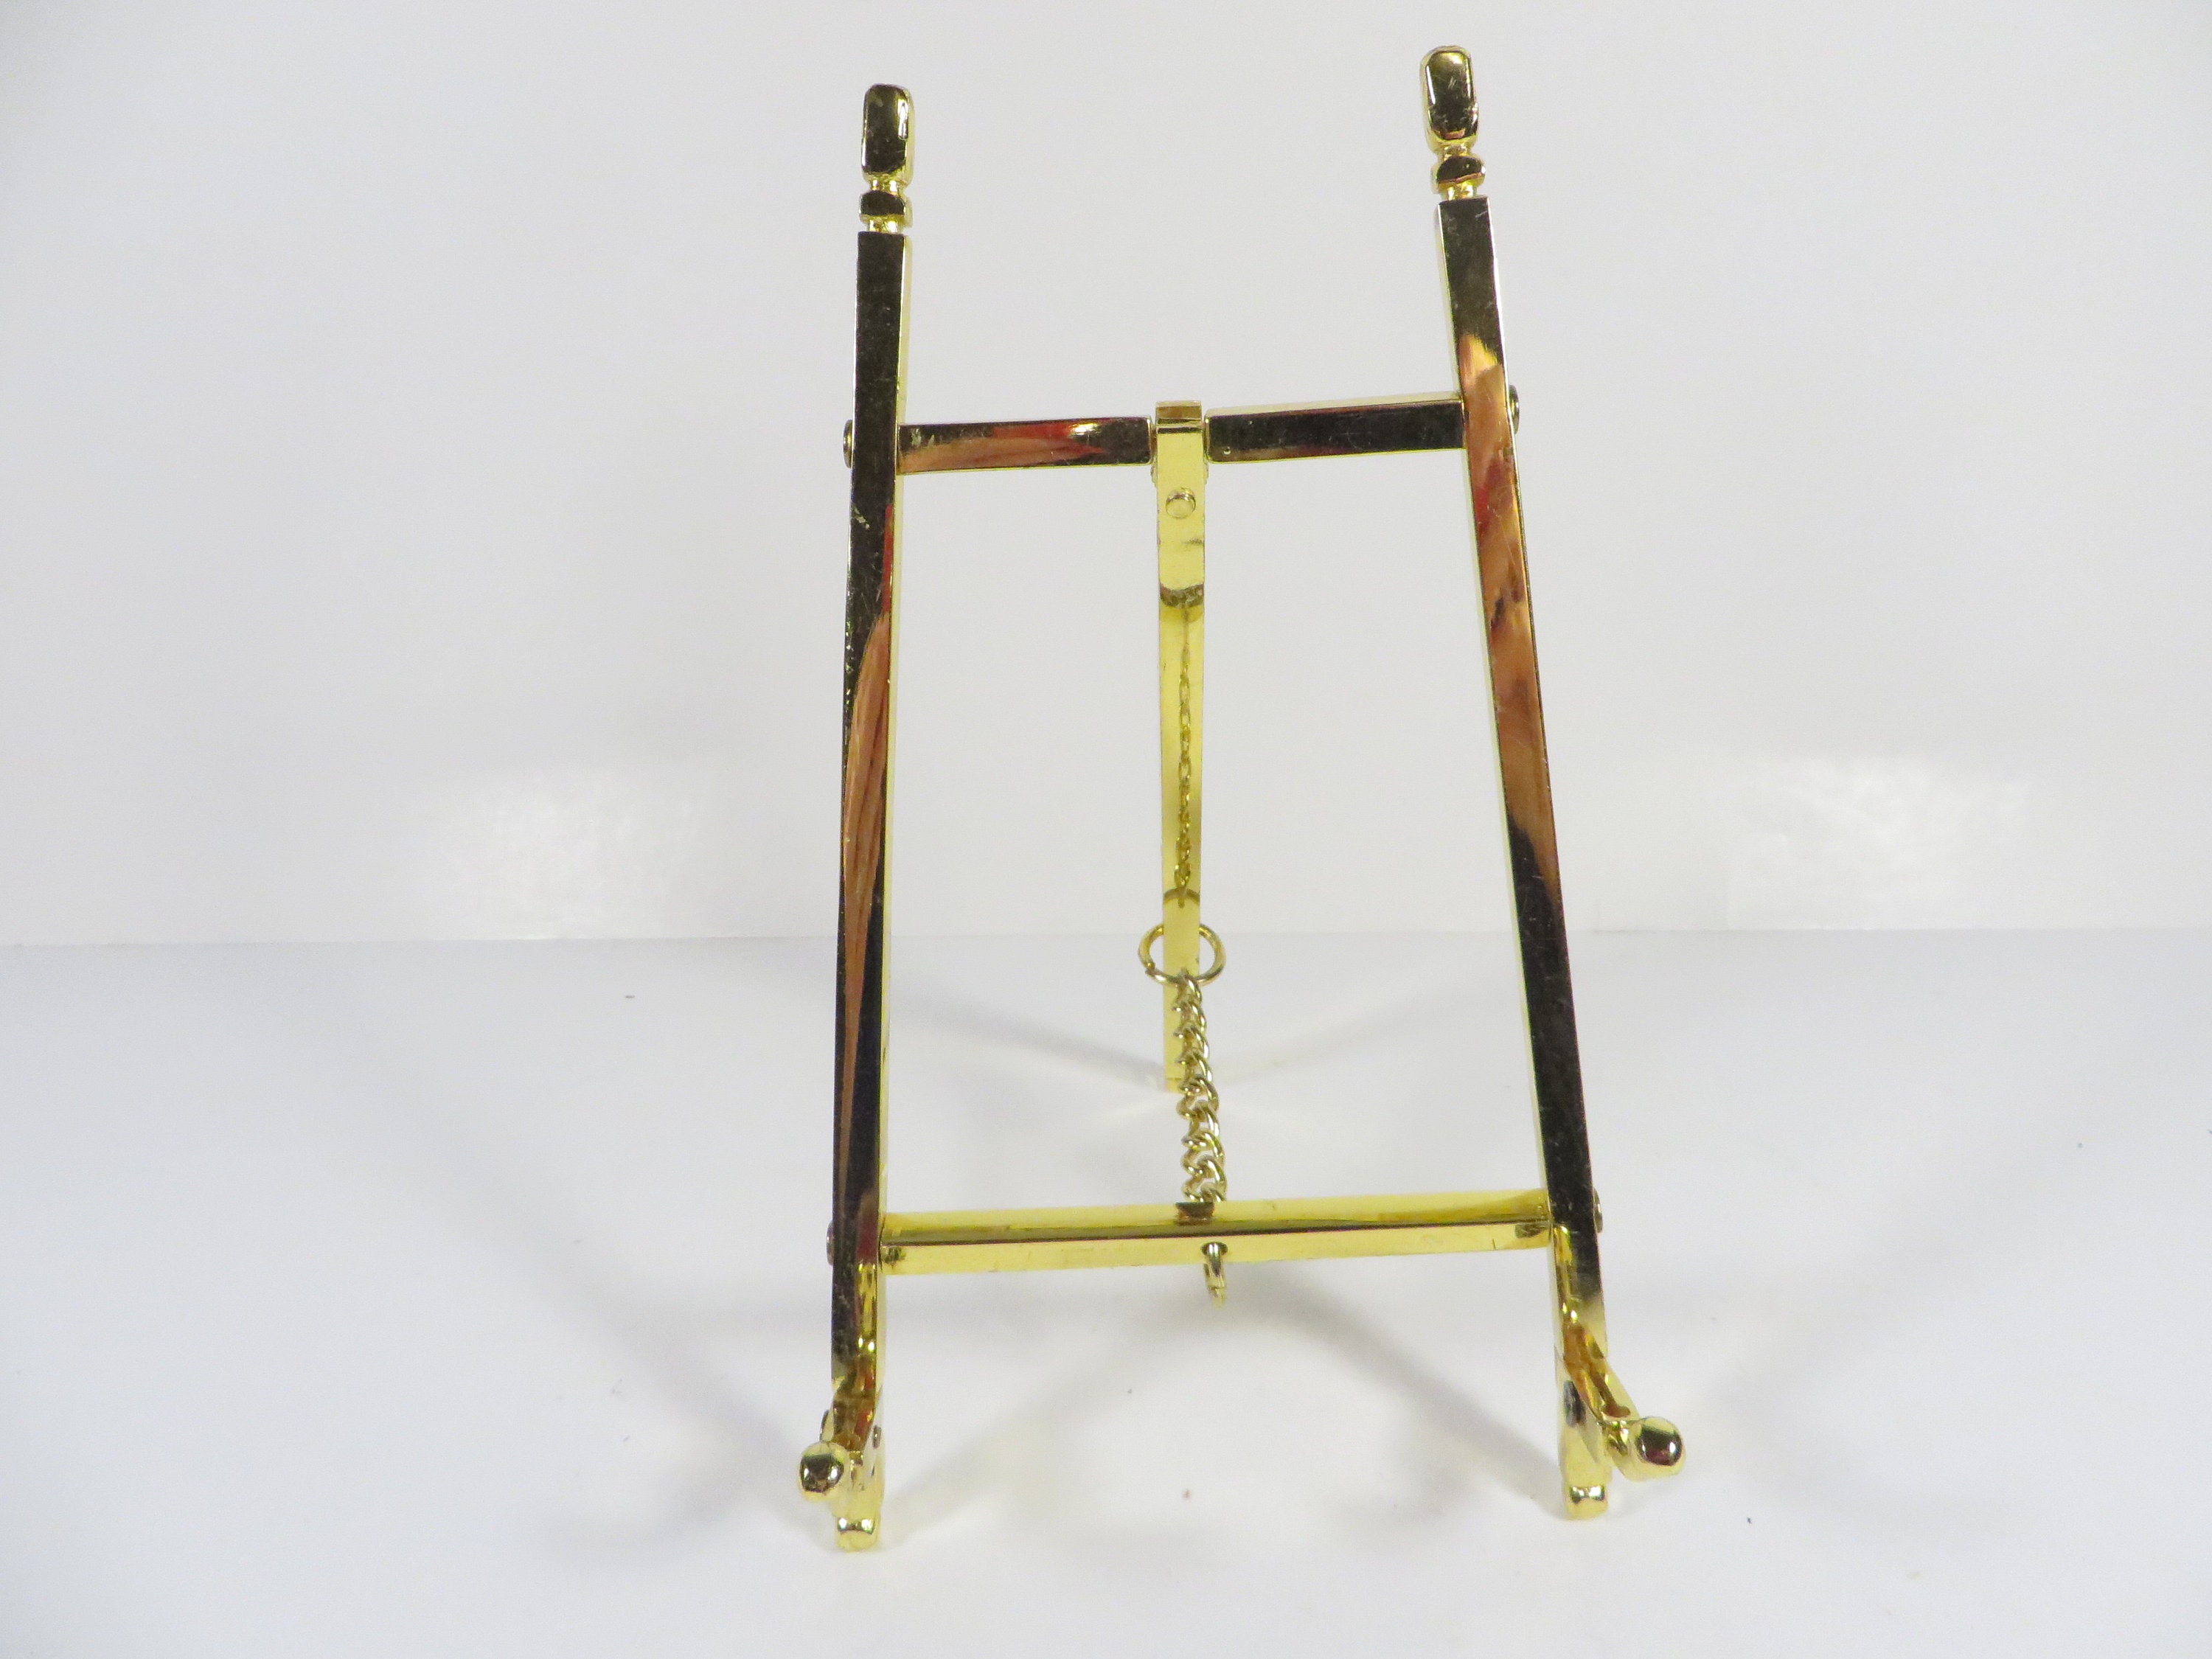 Decorative Metal Easel 10 Tall Display Stand Iron, Copper, Antique Brass  and Pewter 